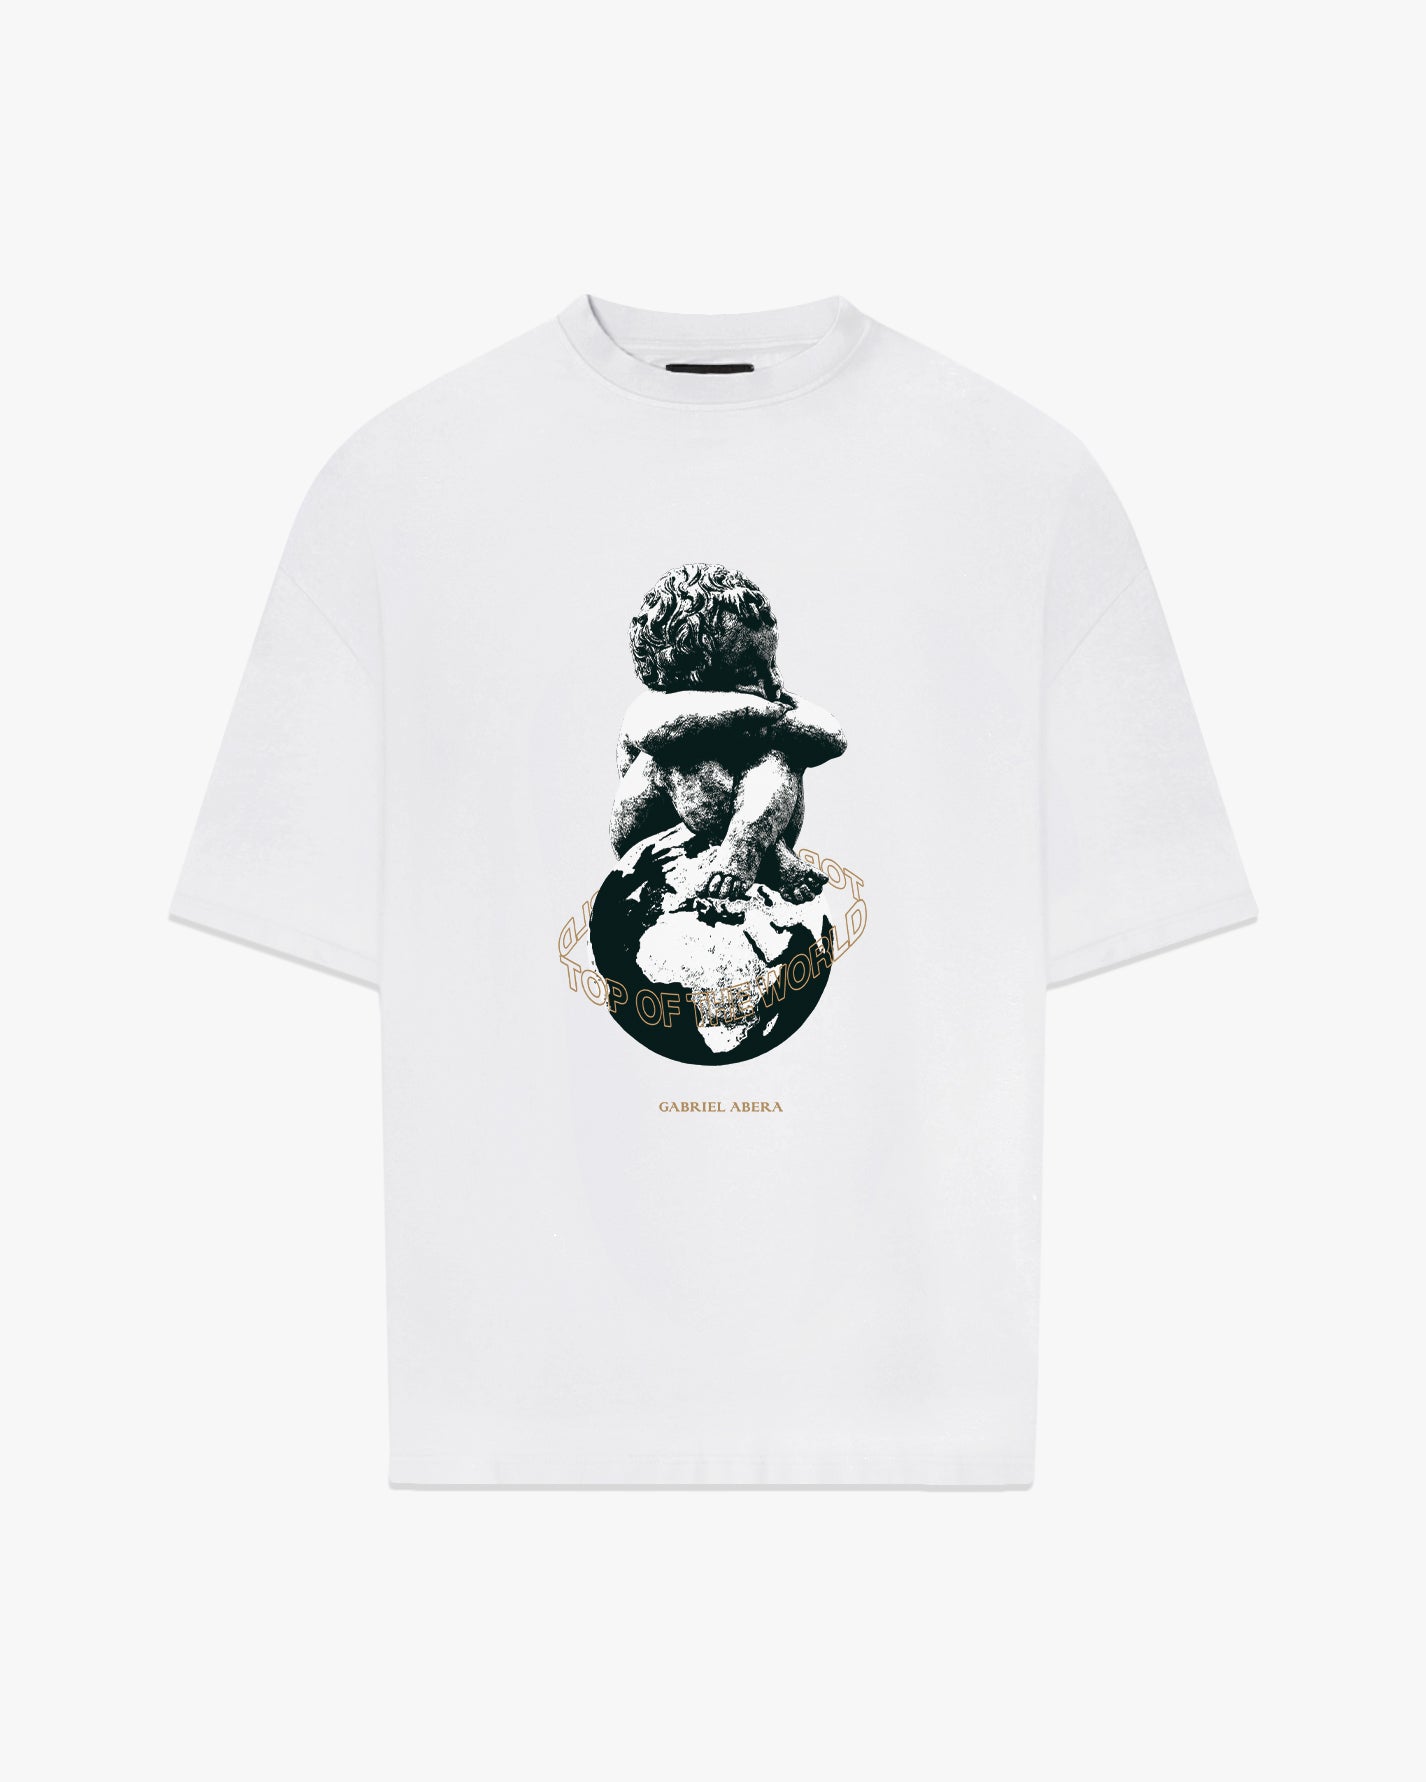 White oversize t shirt with kid on globe design in the front